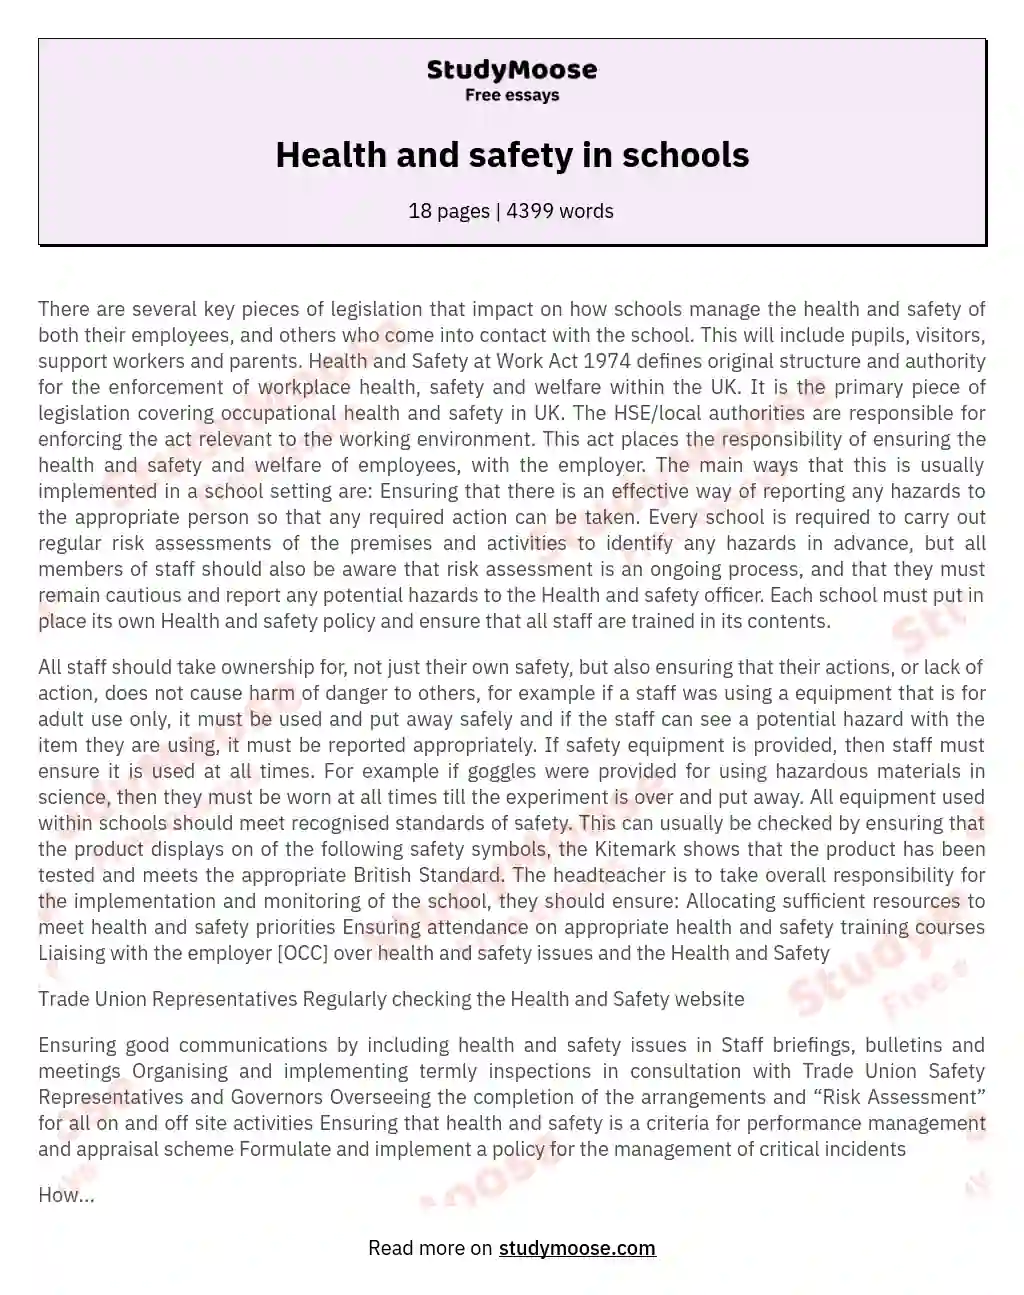 Health and safety in schools essay